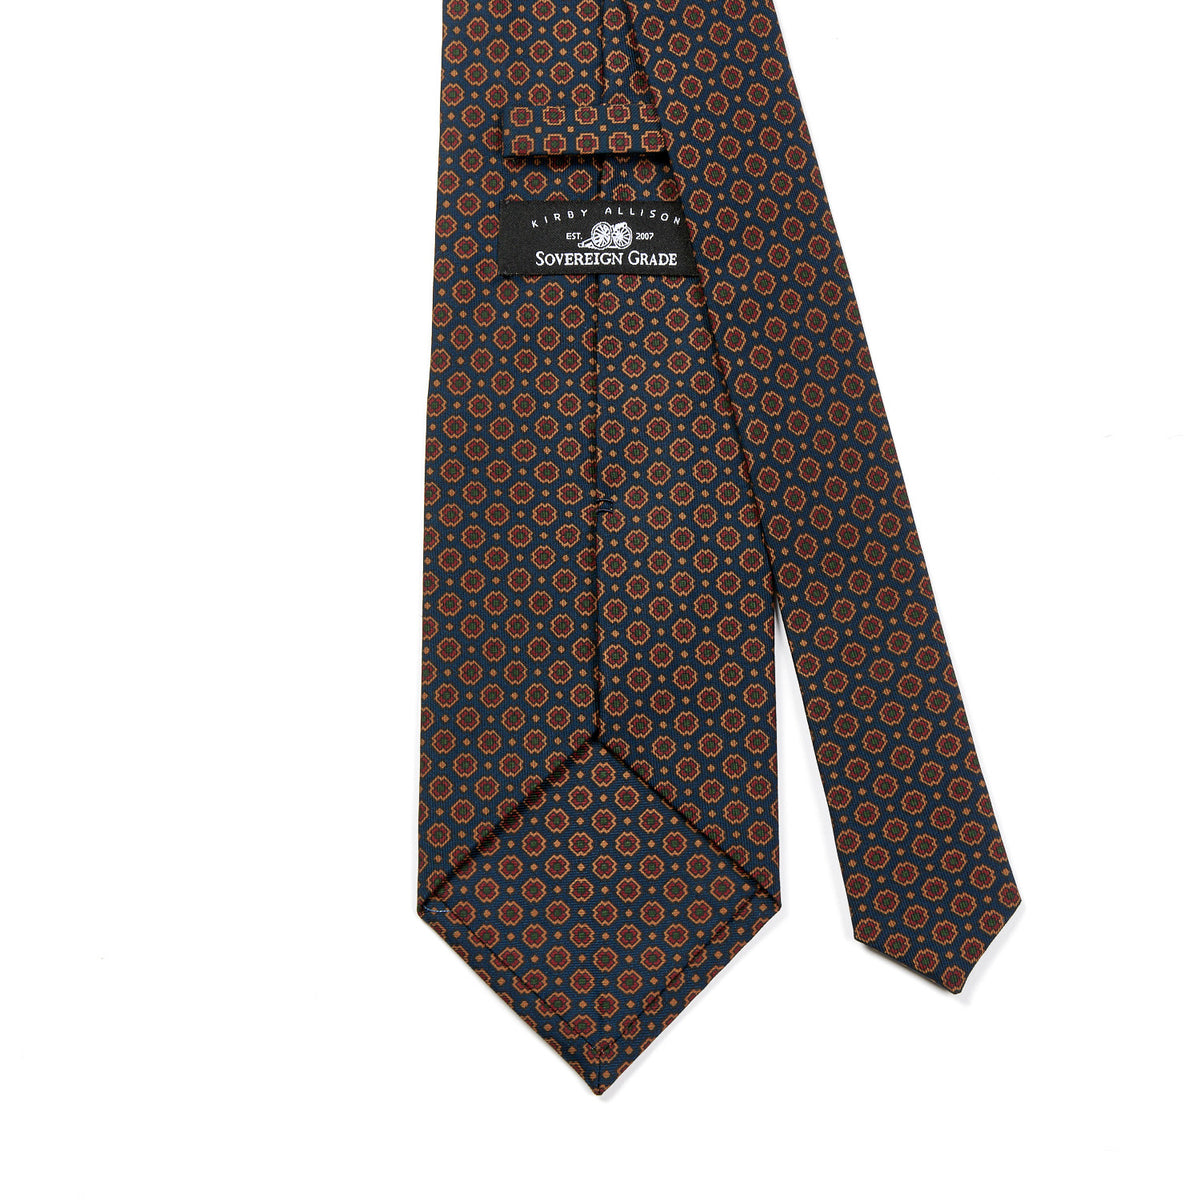 A Sovereign Grade Dark Navy Small Floral Ancient Madder tie from KirbyAllison.com, handcrafted in the United Kingdom.